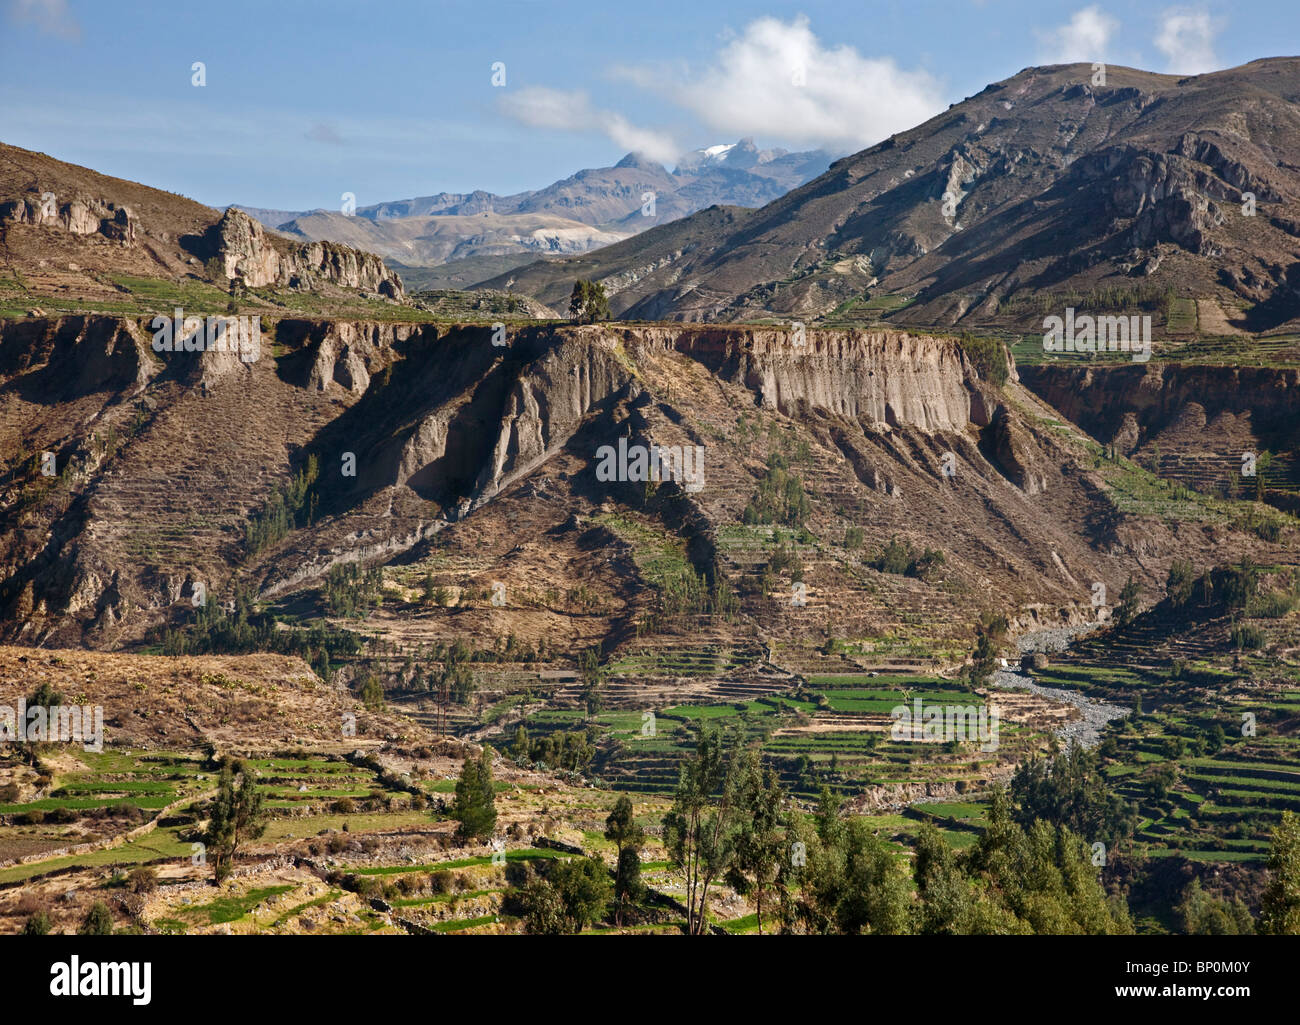 Peru, Farms using pre-Inca terracing in the magnificent Colca Canyon with snow-capped peaks in the distance. Stock Photo